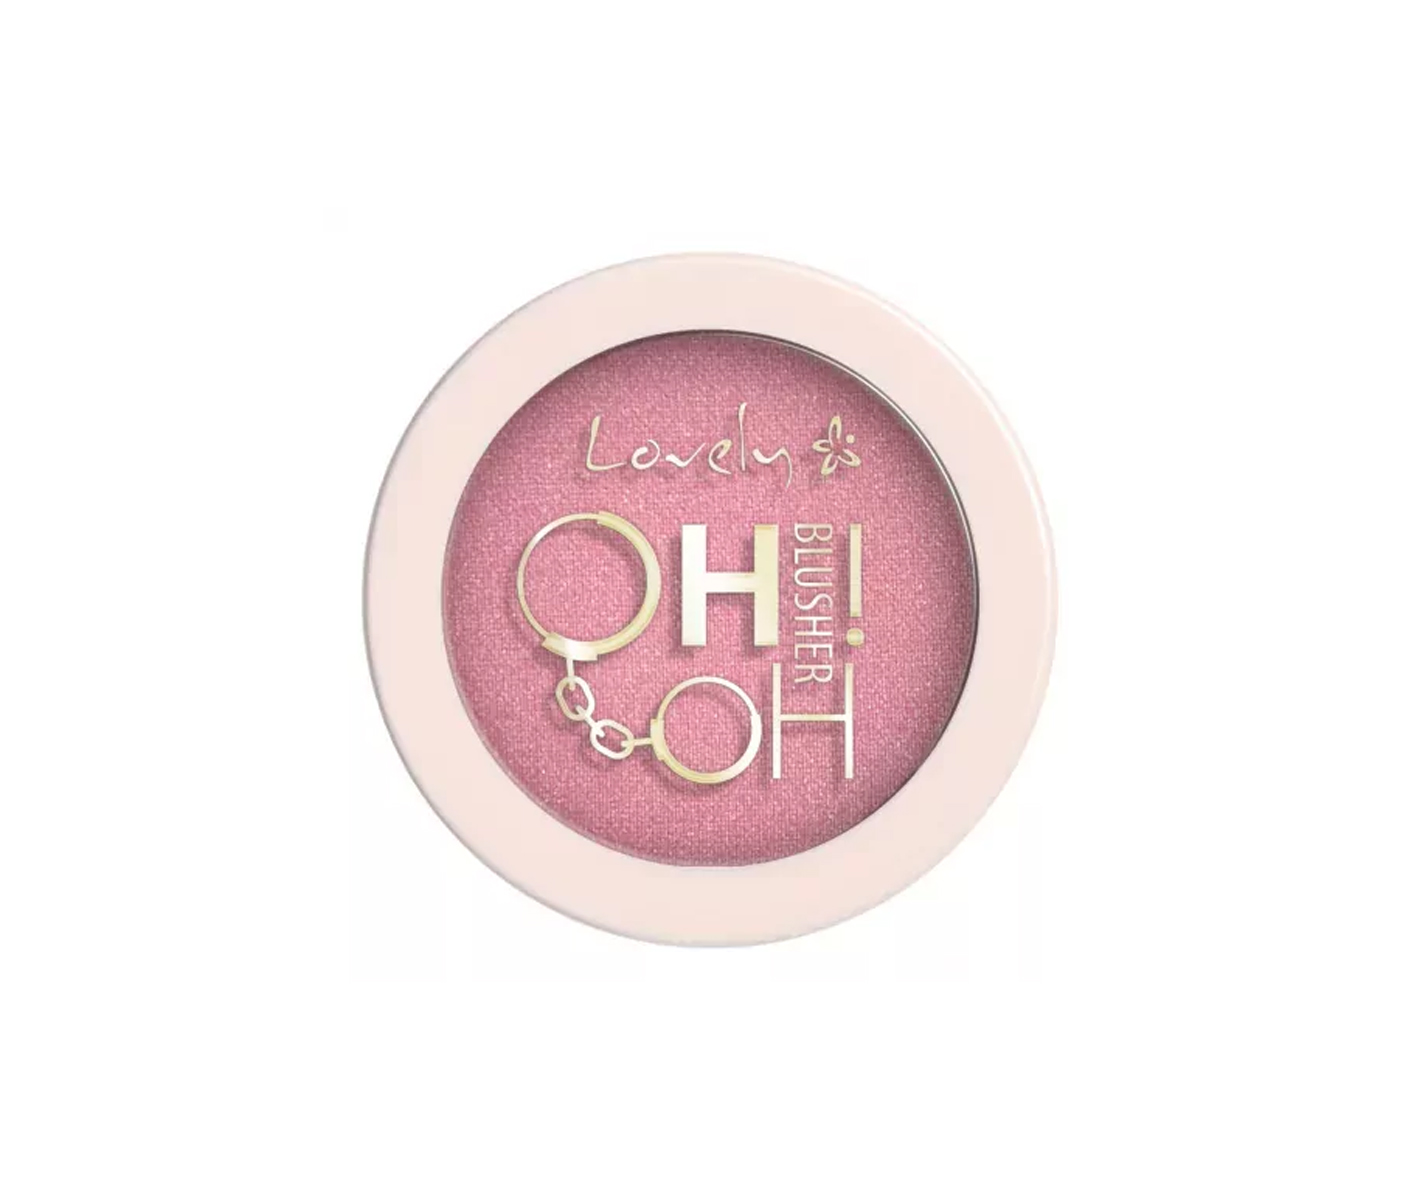 Lovely, Oh Oh Blusher, holographic blush